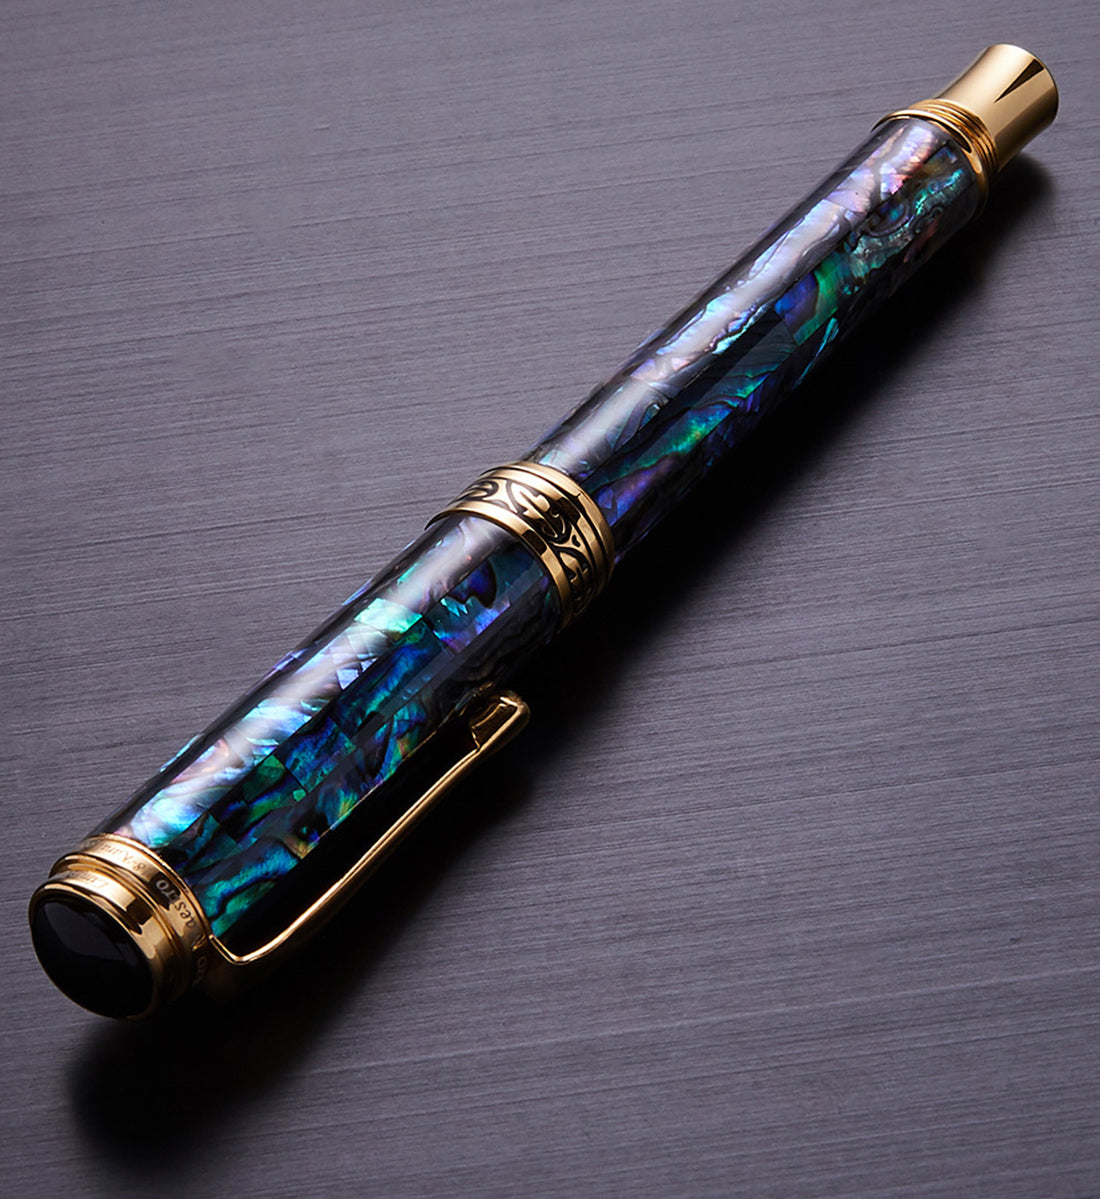 Xezo - Angled 3D side view of the Maestro Sea Shell FPG-M fountain pen